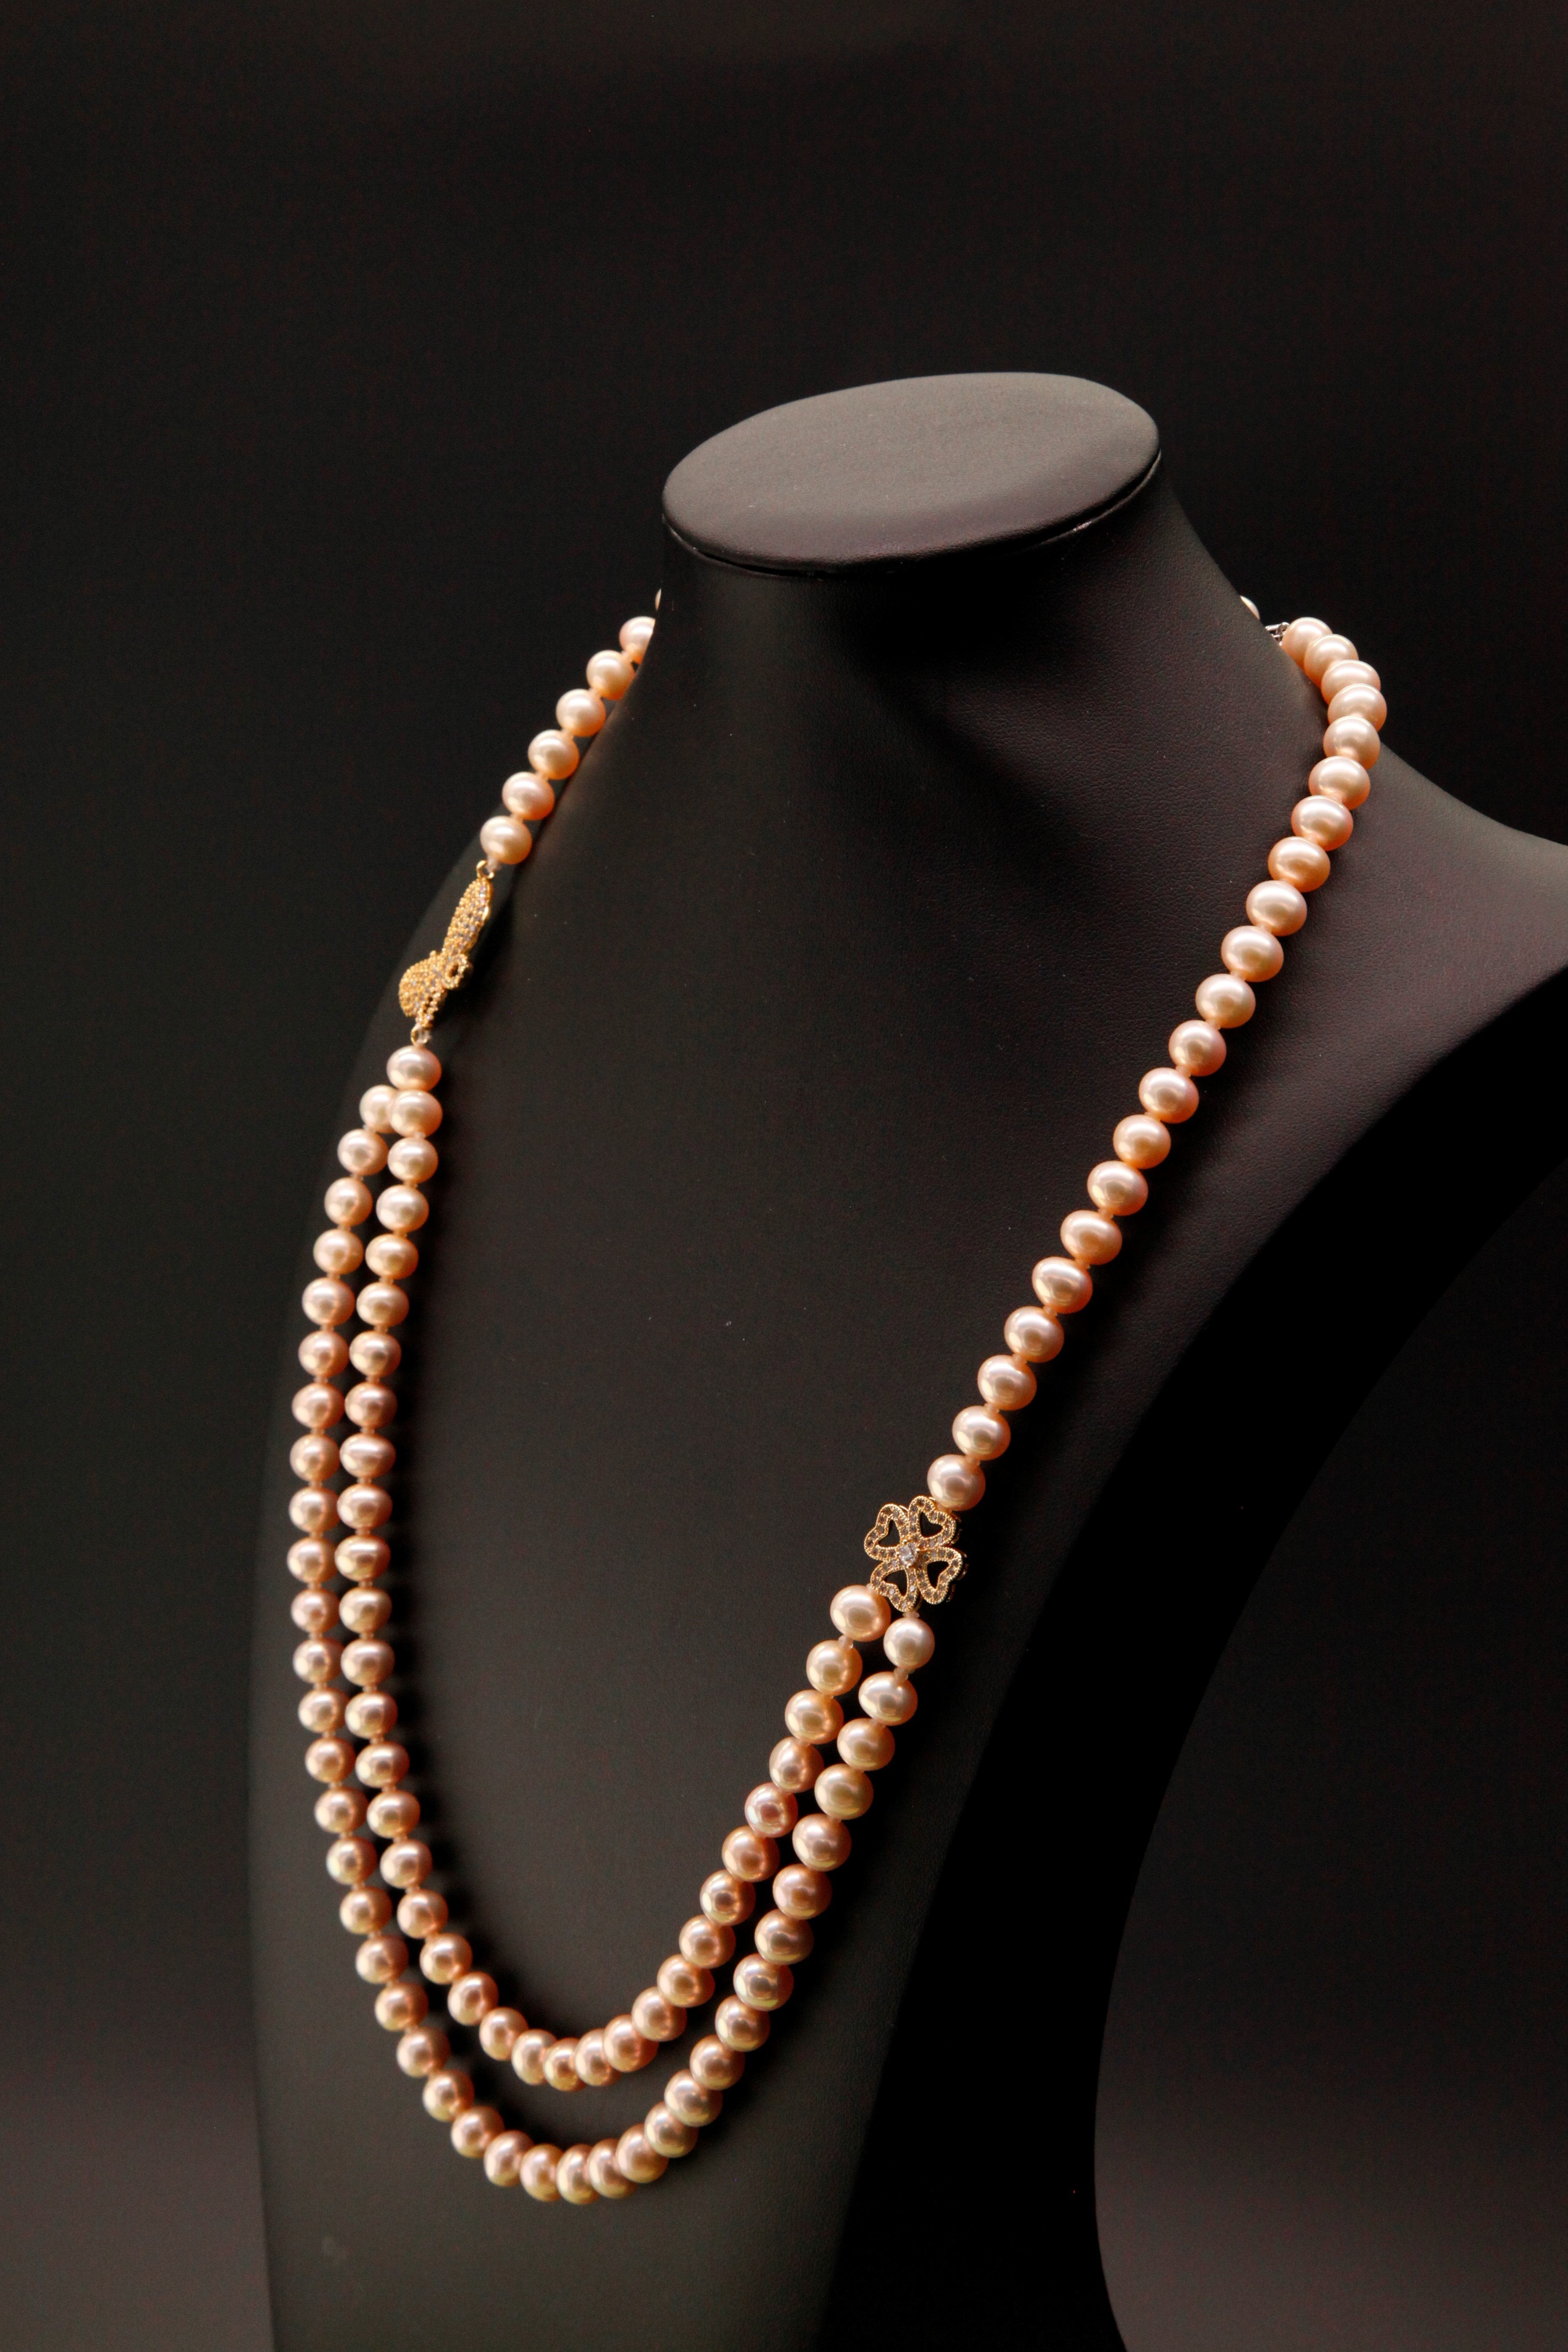 Butterfly and Four Leaf Clove Cultured Pearl Necklace